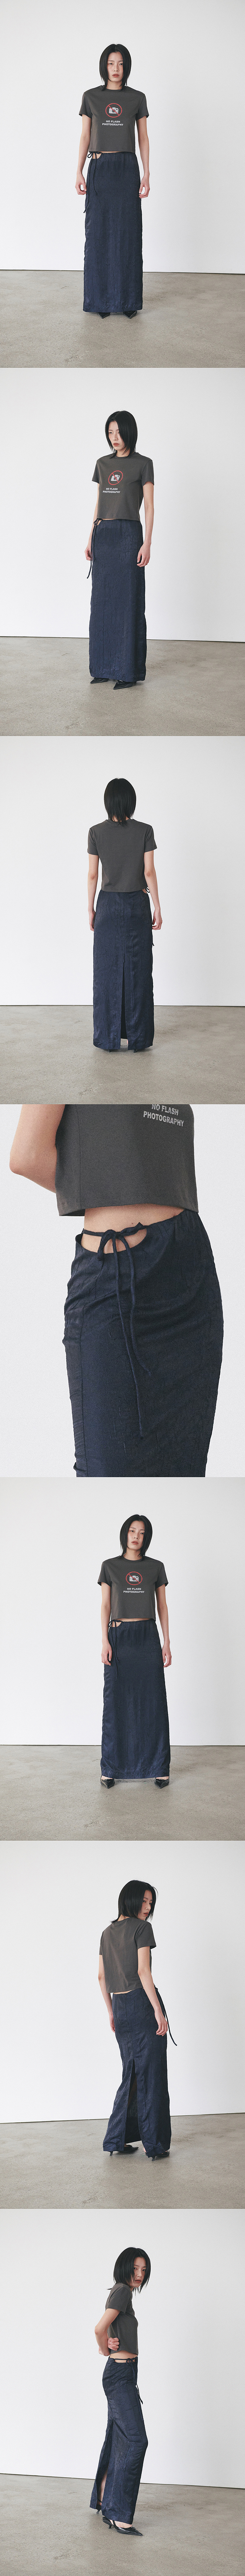 CRINKLE CUT-OUT MAXI SKIRTS - NAVY